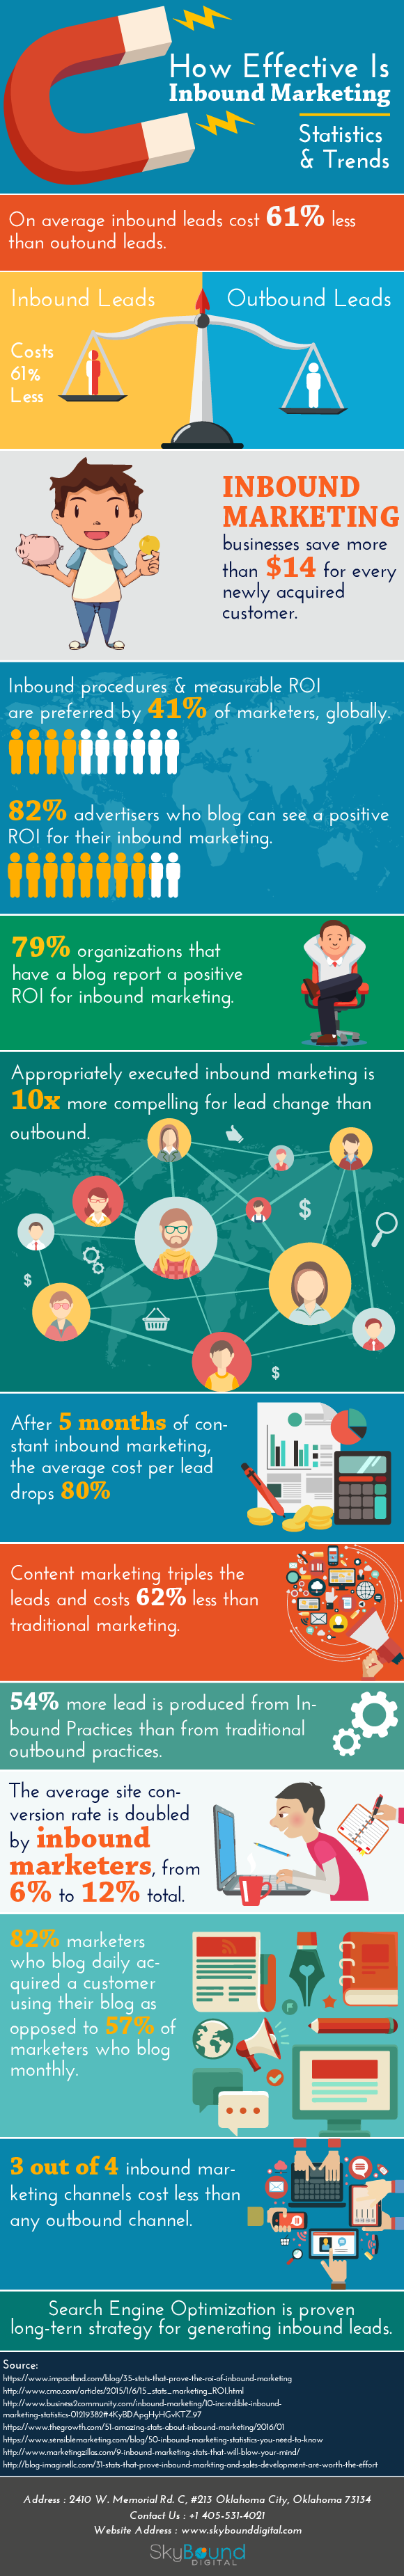 Find Out How Effective Is Inbound Marketing